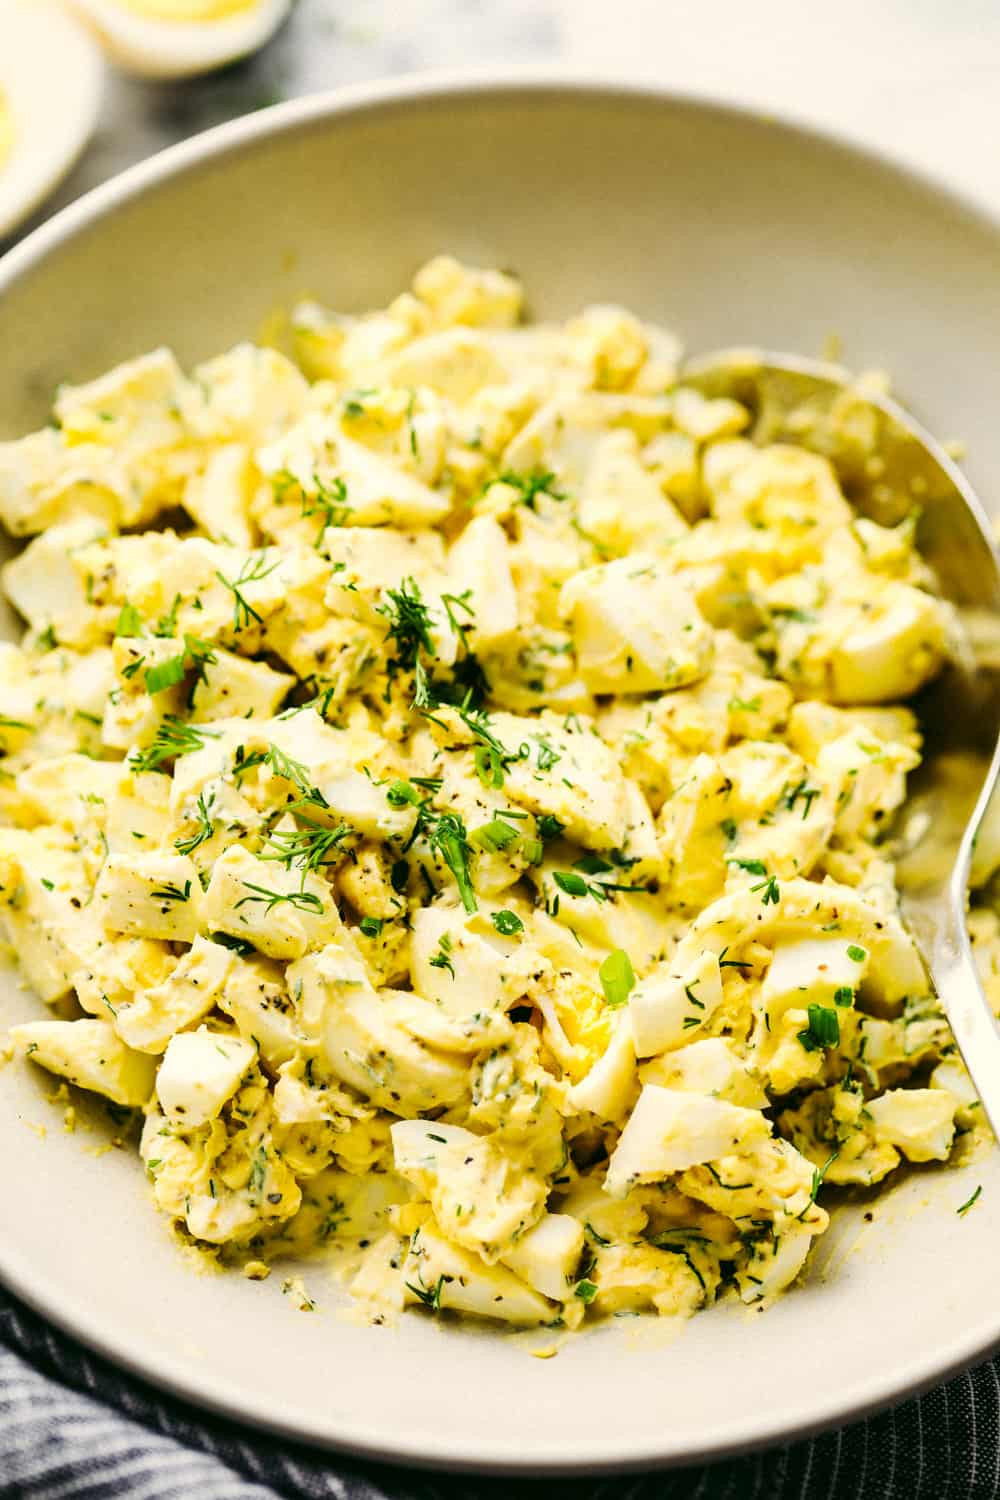 Chicken Salad Recipe with Egg Fresh Literally the Best Egg Salad